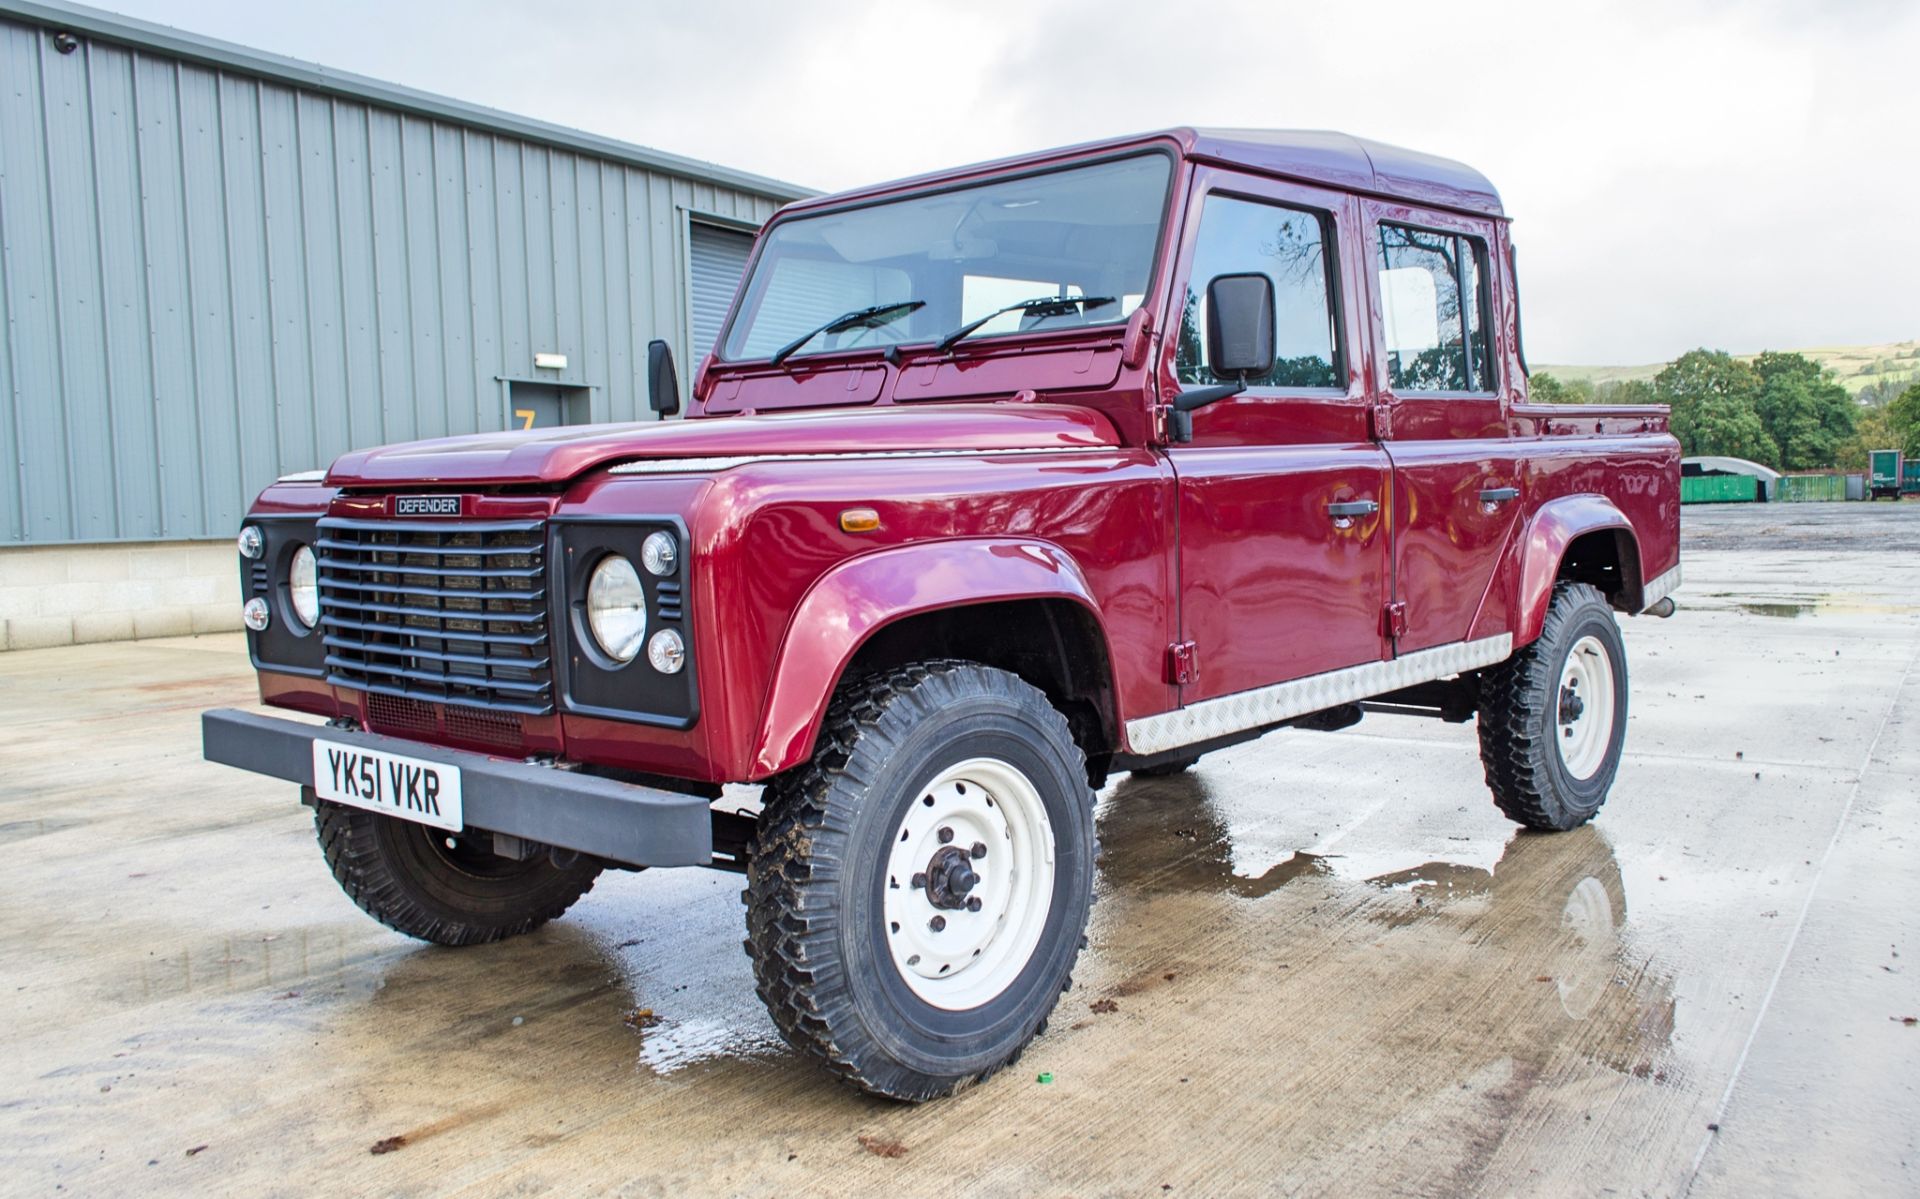 Land Rover Defender 110 County TD5 4x4 double cab pick up Registration Number: YK51 VKR Date of